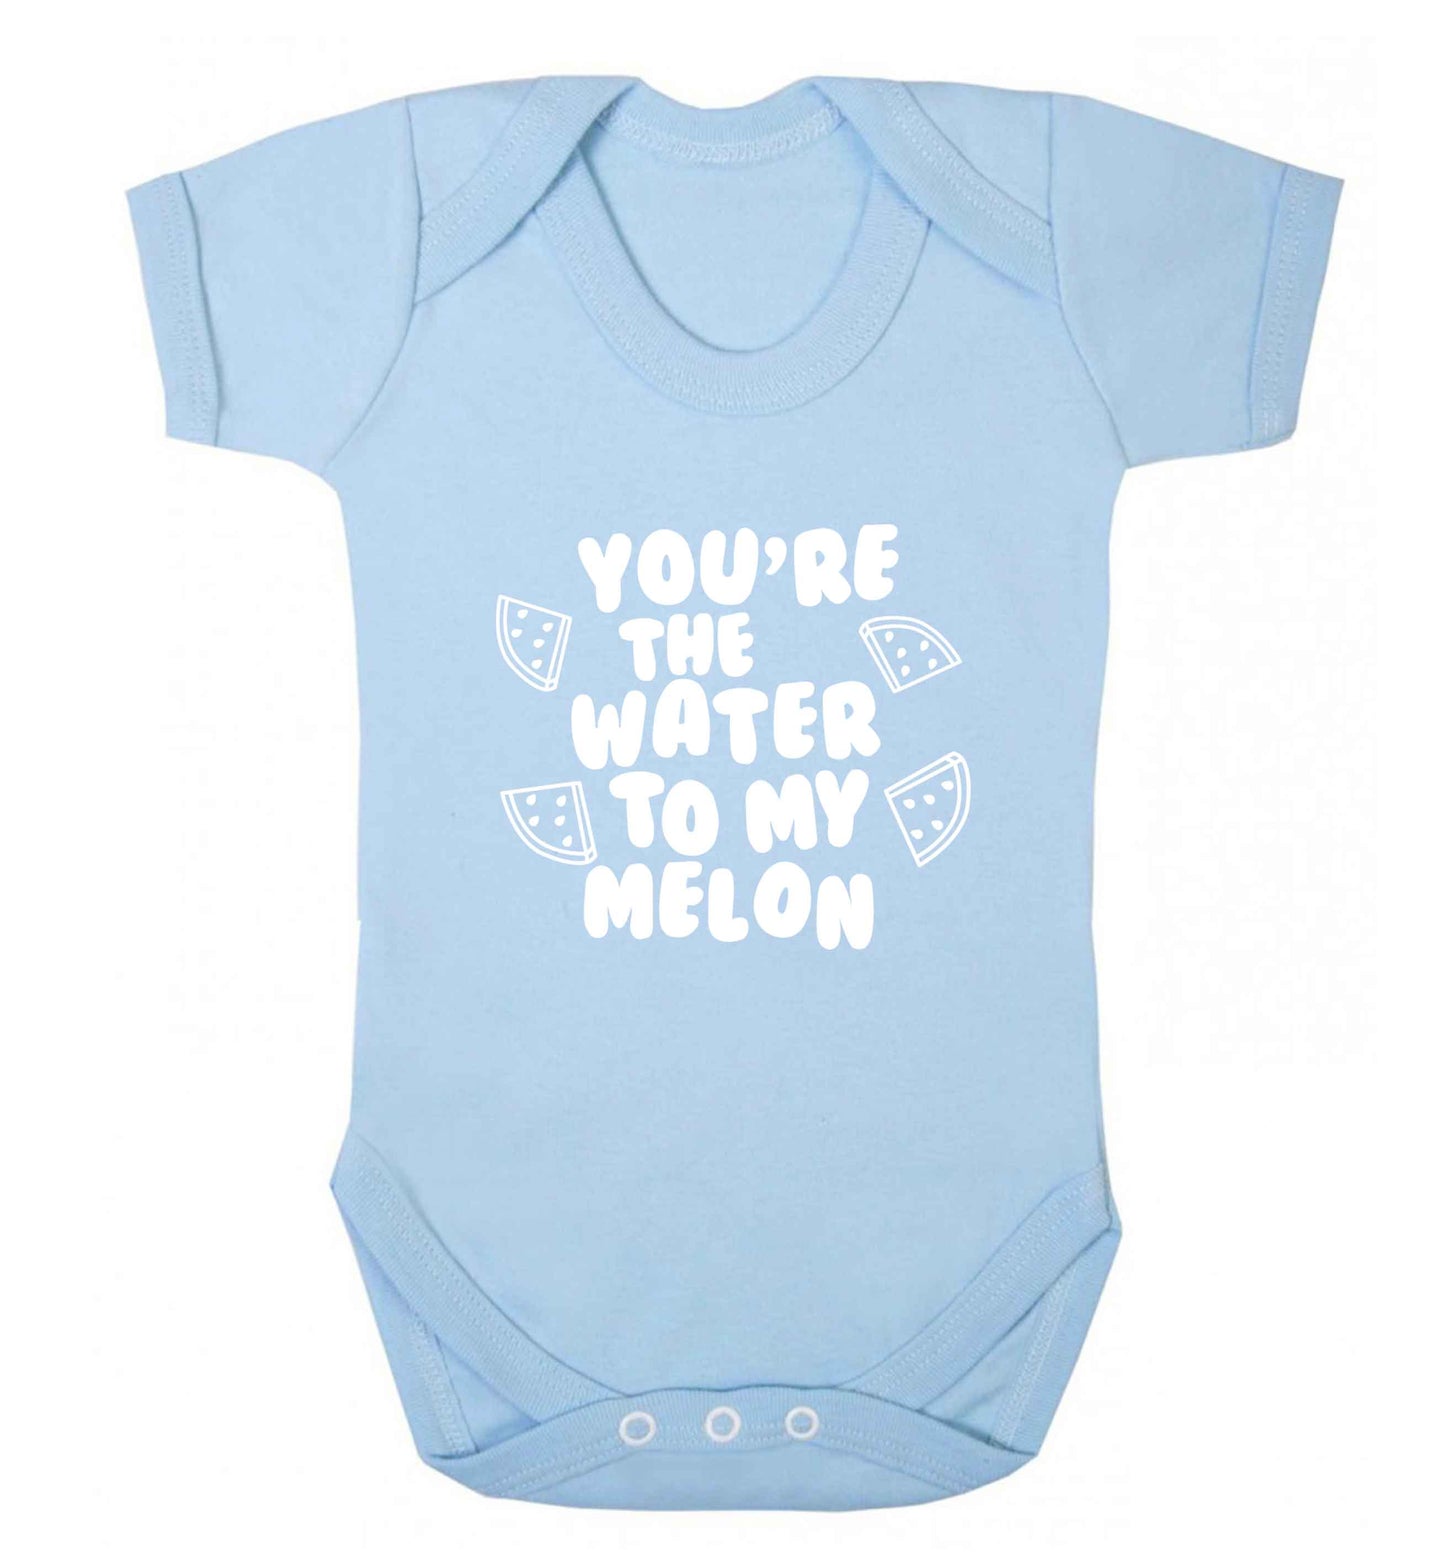 You're the water to my melon baby vest pale blue 18-24 months